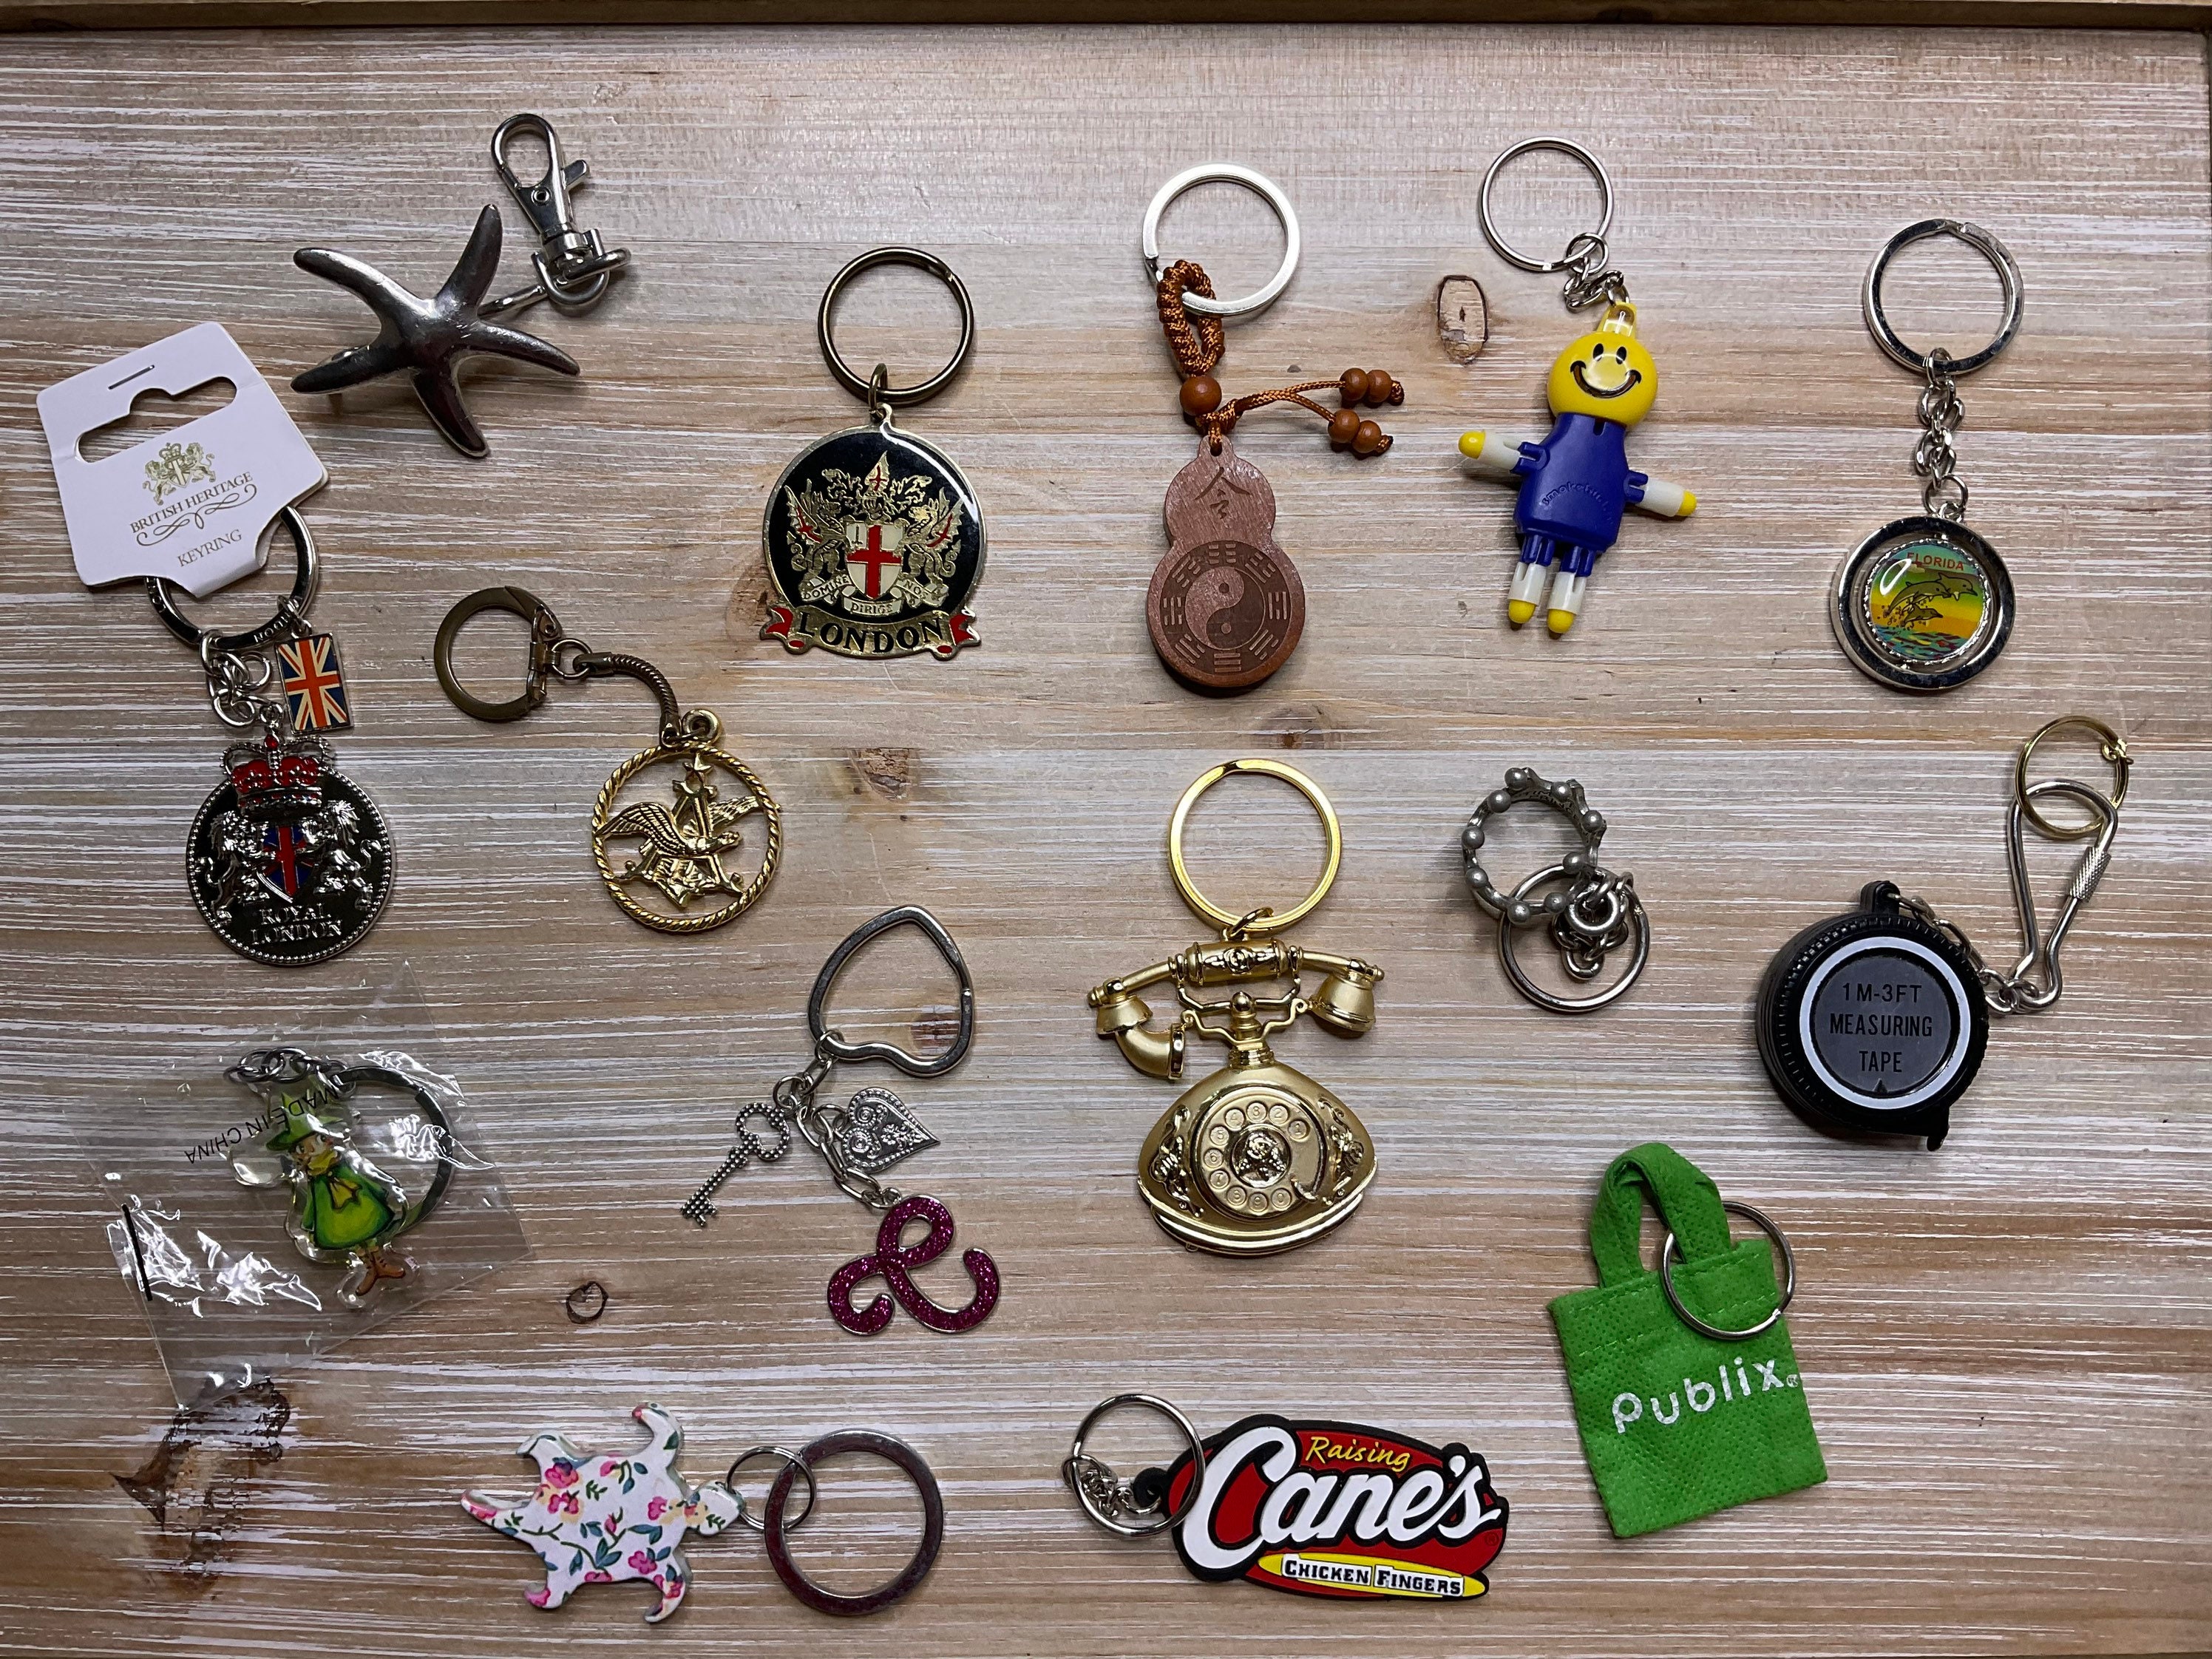 7.5 pounds Mixed Keychains Resale Bulk Lot, Junk Drawer Grab Bag Perfect  Gifts!